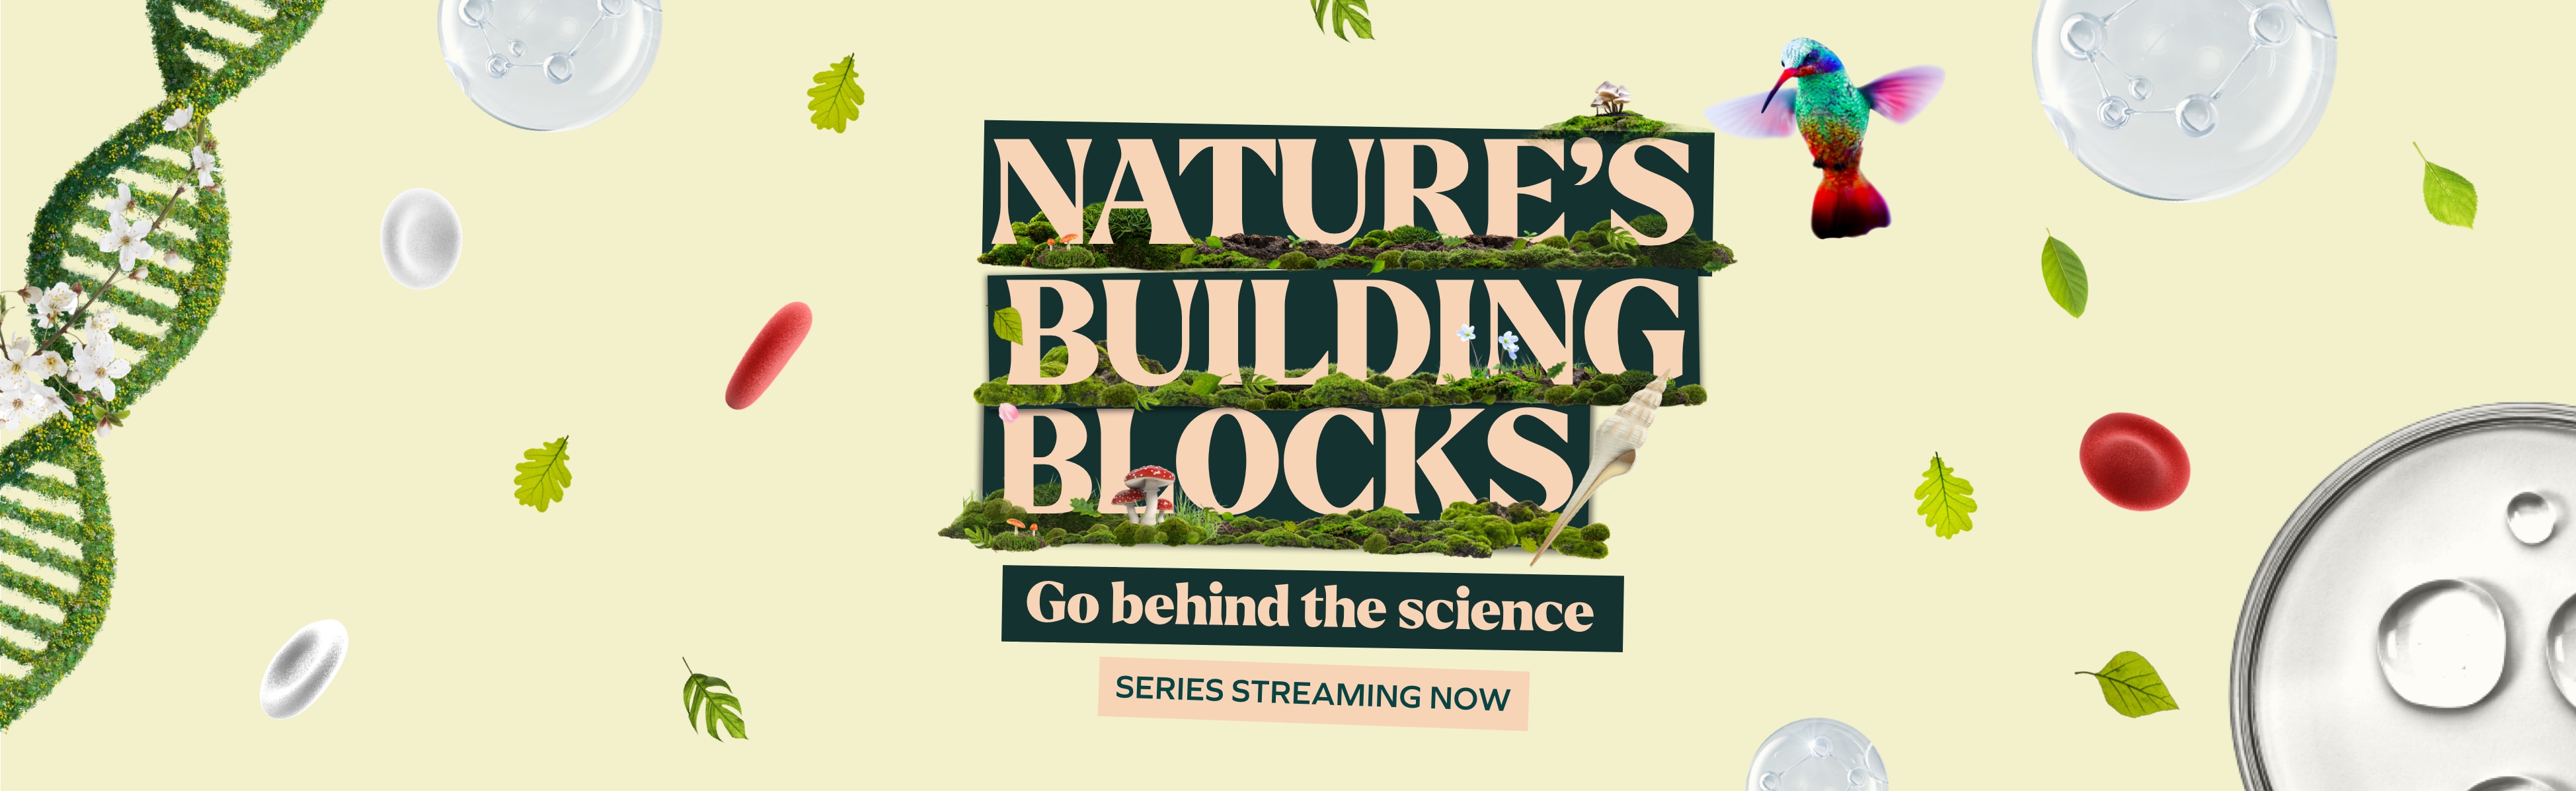 Click to watch Nature's Building Blocks and go behind the science.